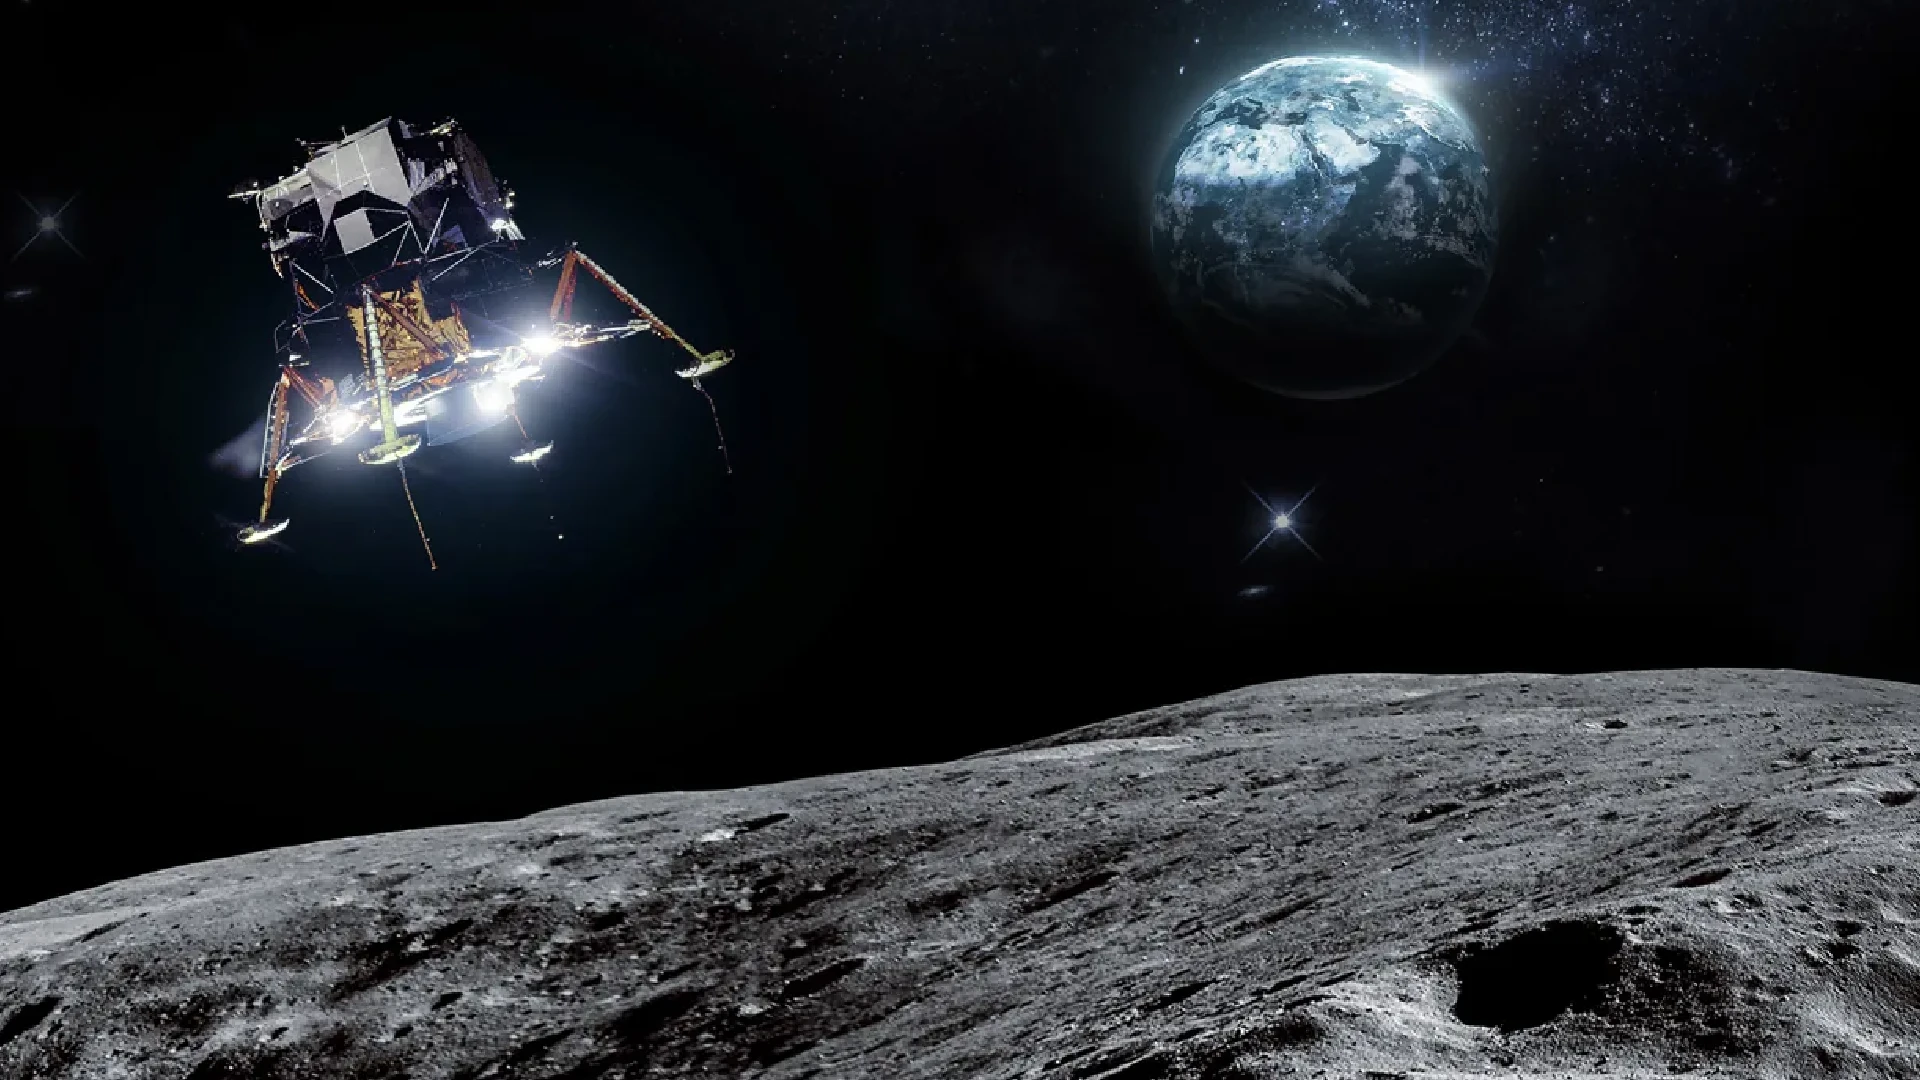 NASA Extends Moon Landing Project By A Year, Blames Jeff Bezos’ Blue Origin For The Delay